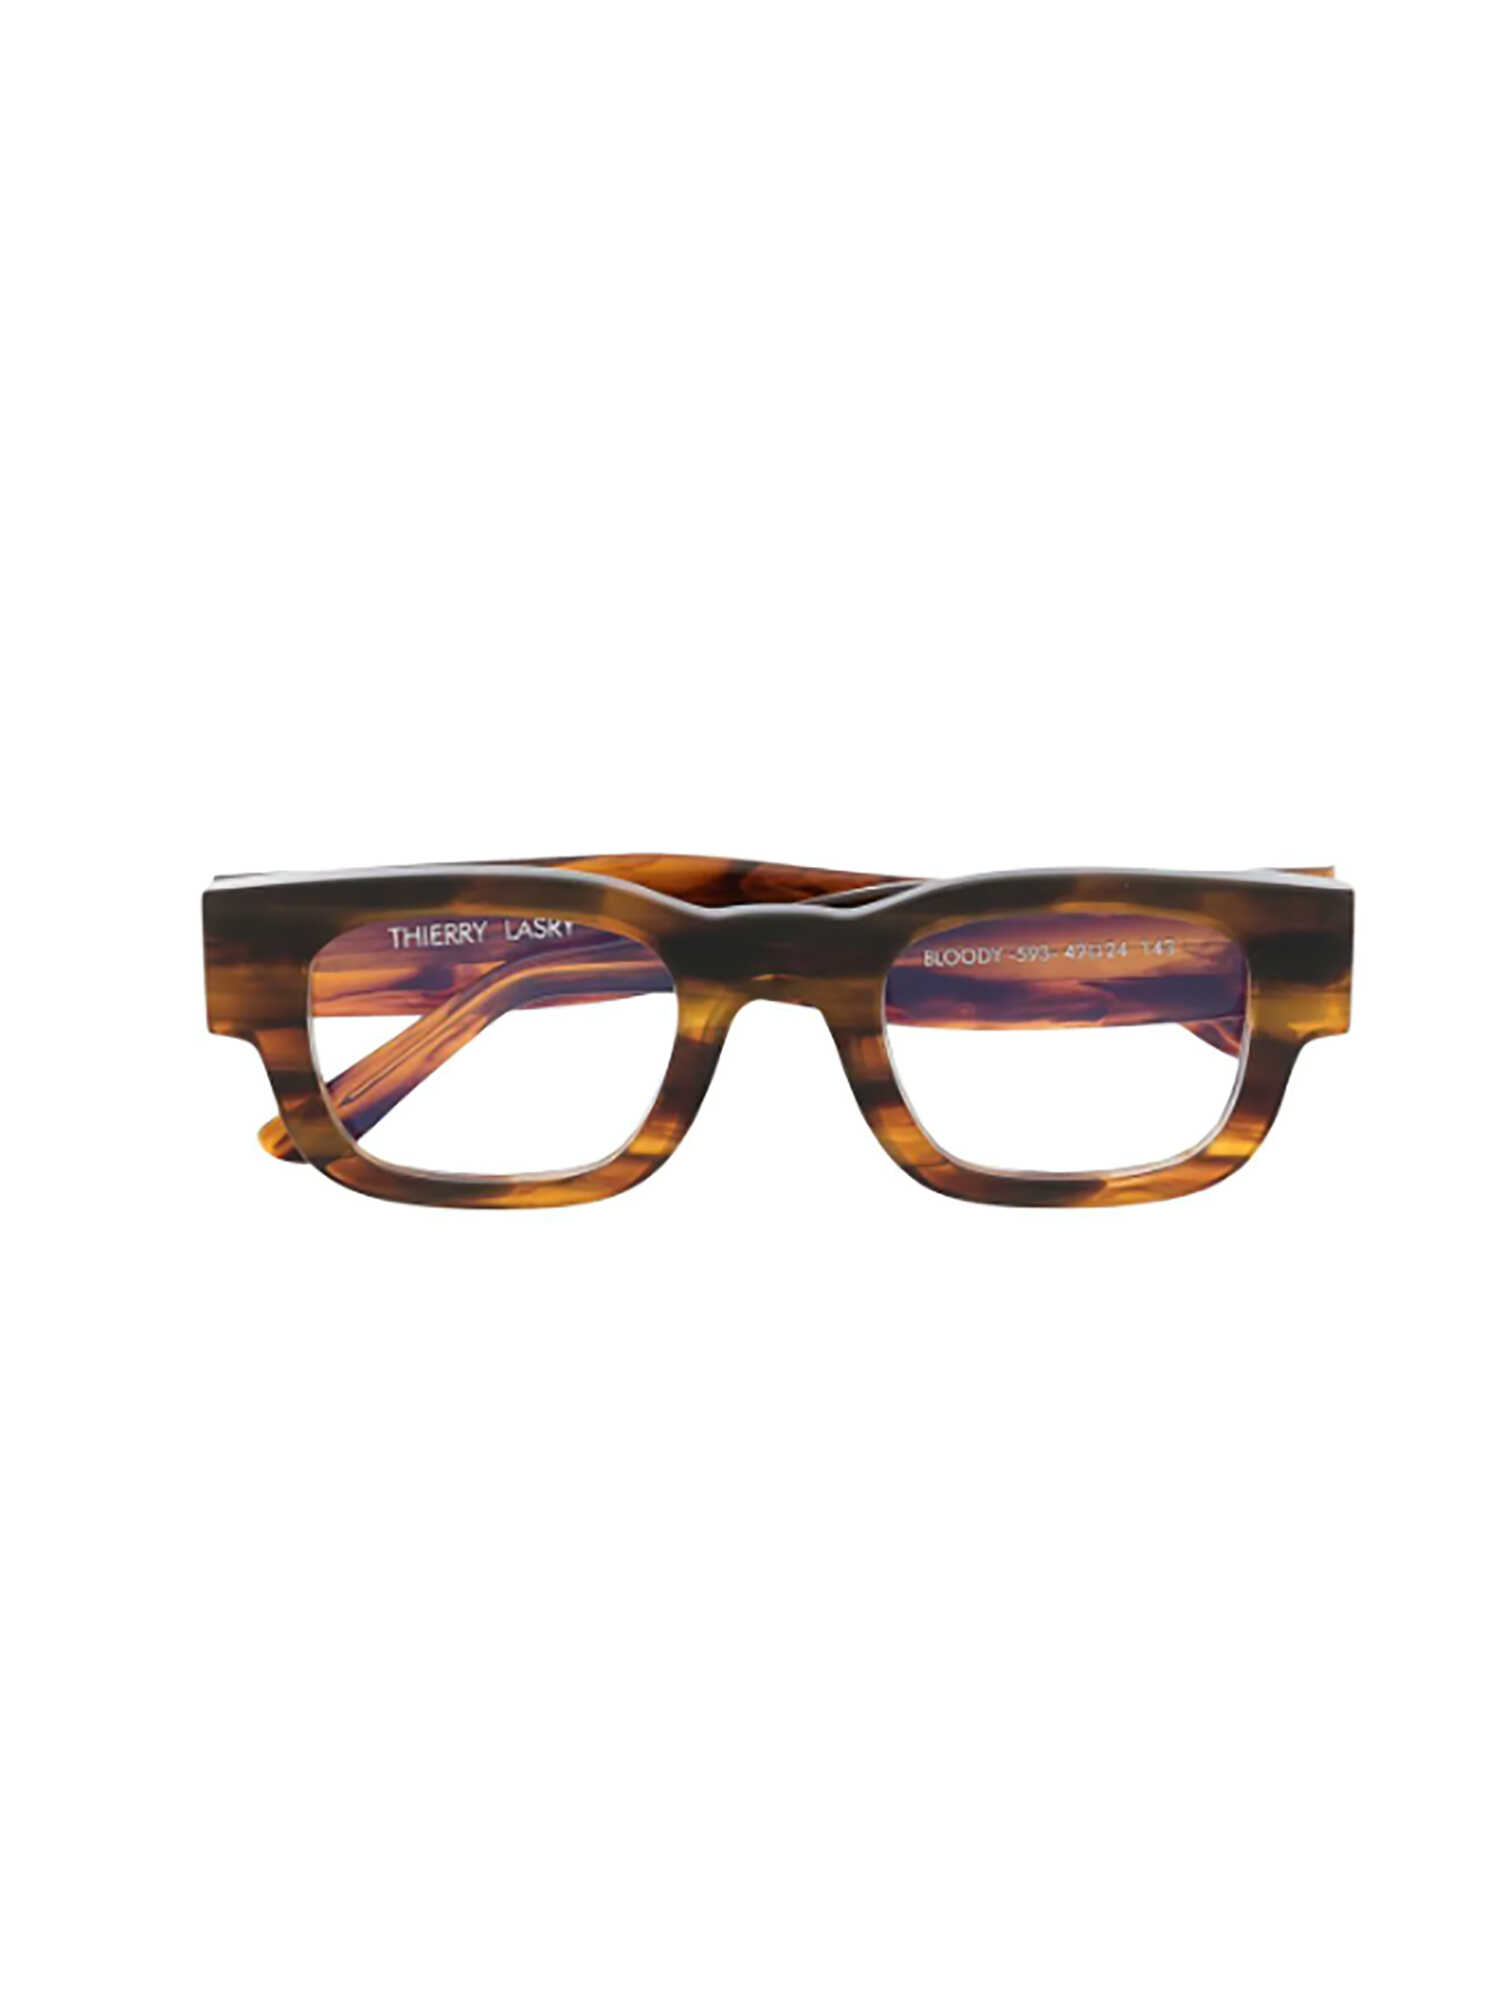 THIERRY LASRY Thierry Lasry BLOODY Brown